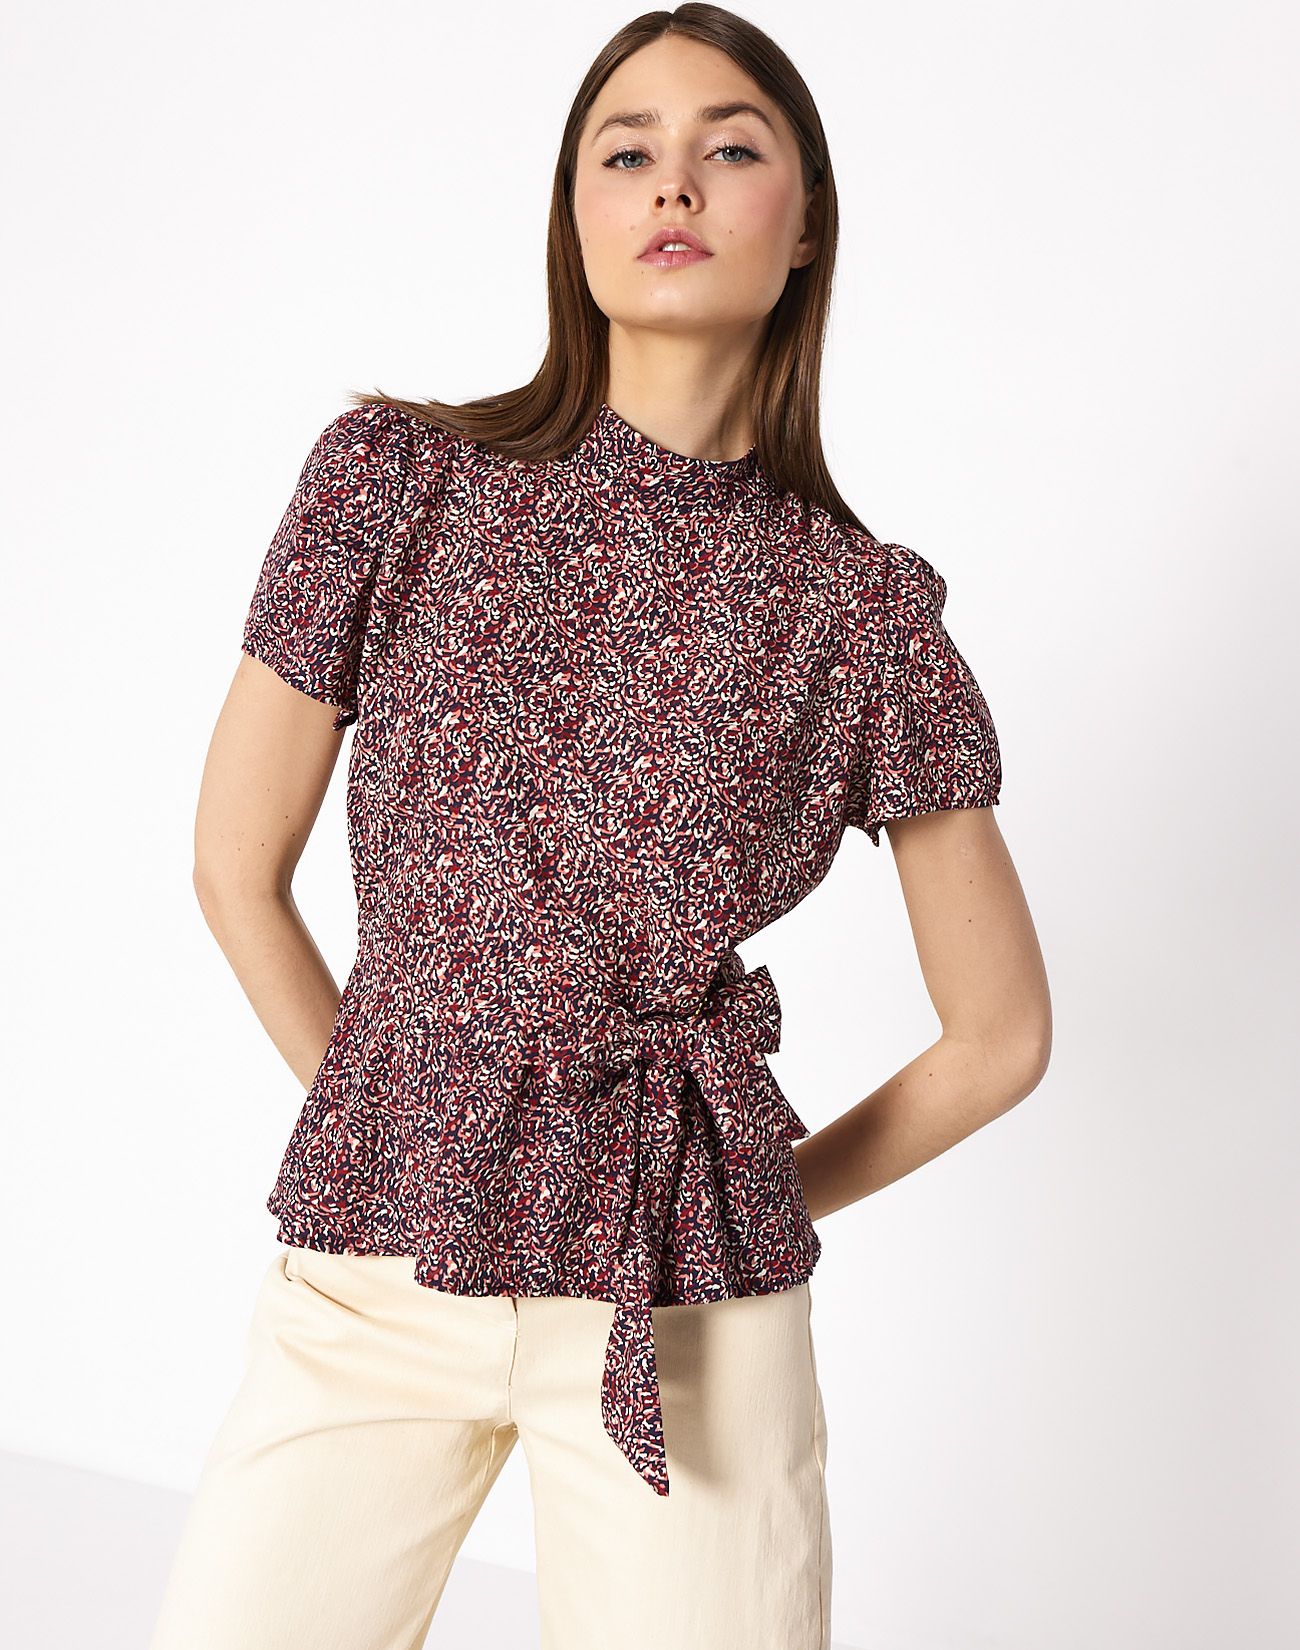 Printed top with tie